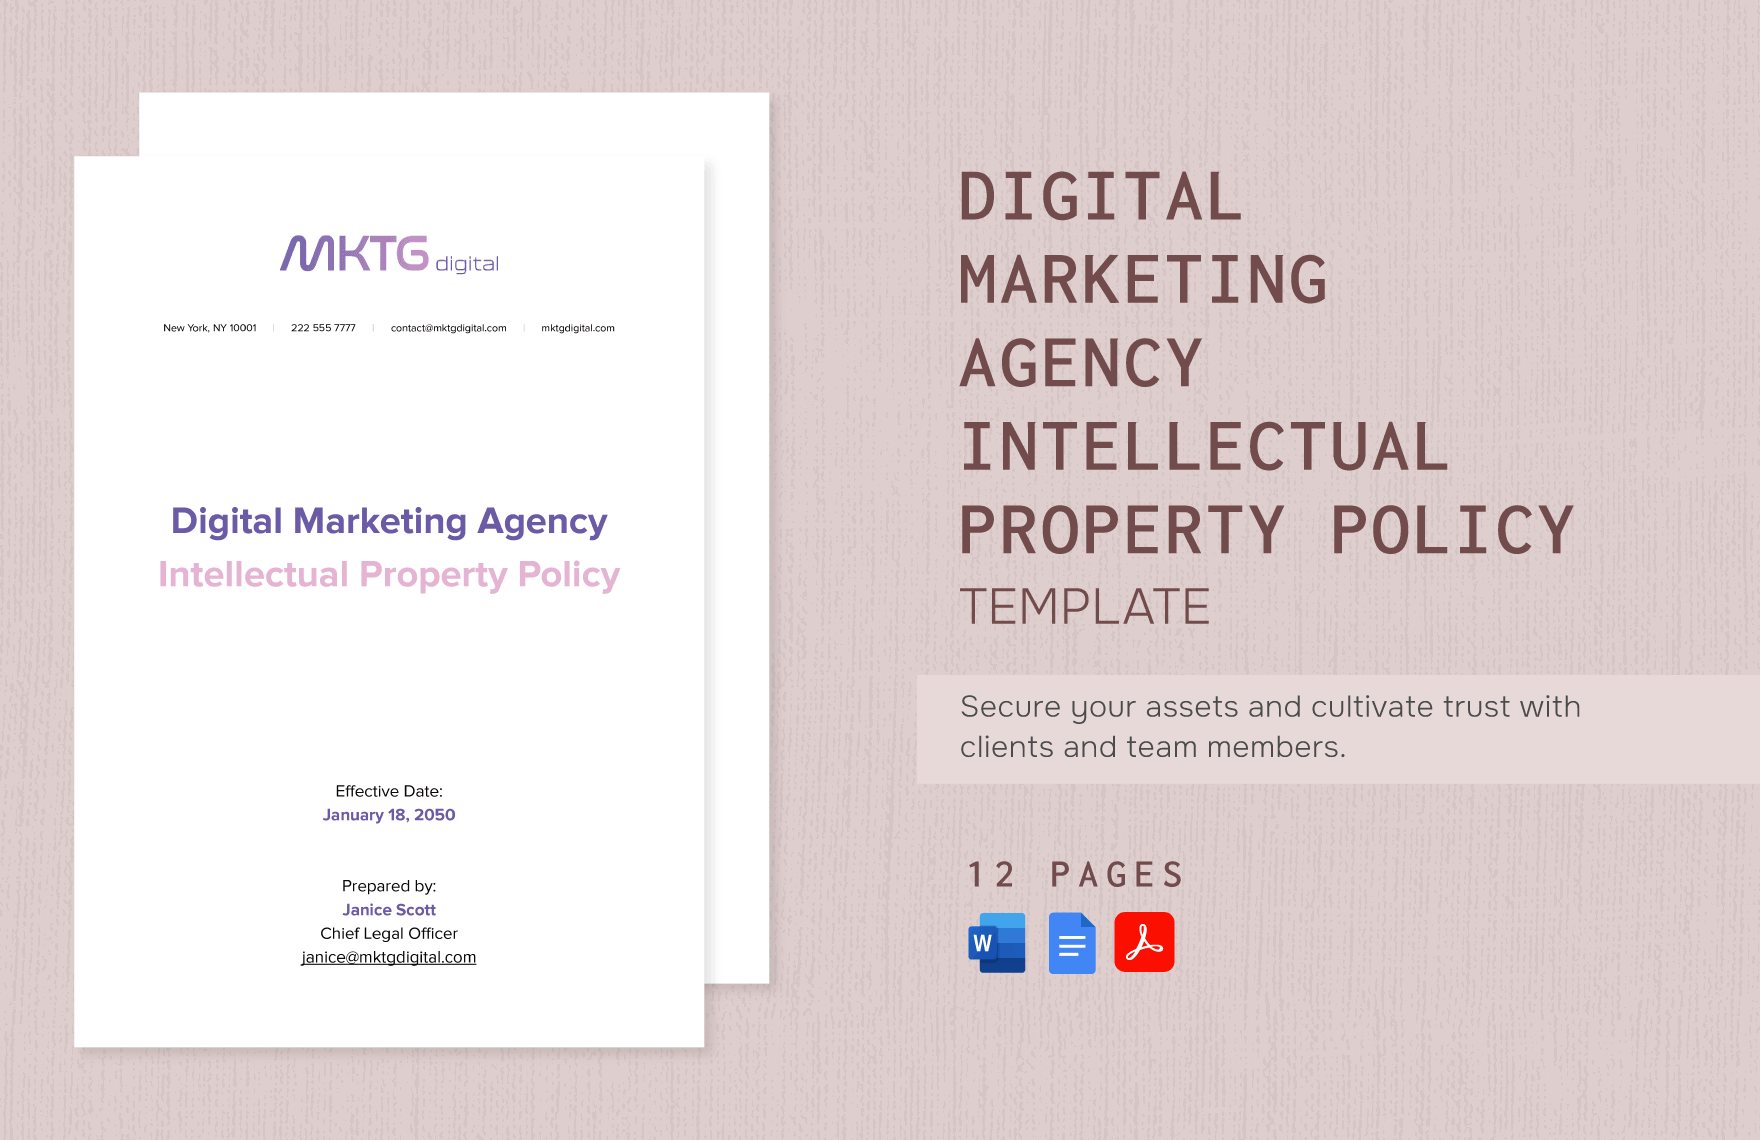 Digital Marketing Agency Intellectual Property Policy Template